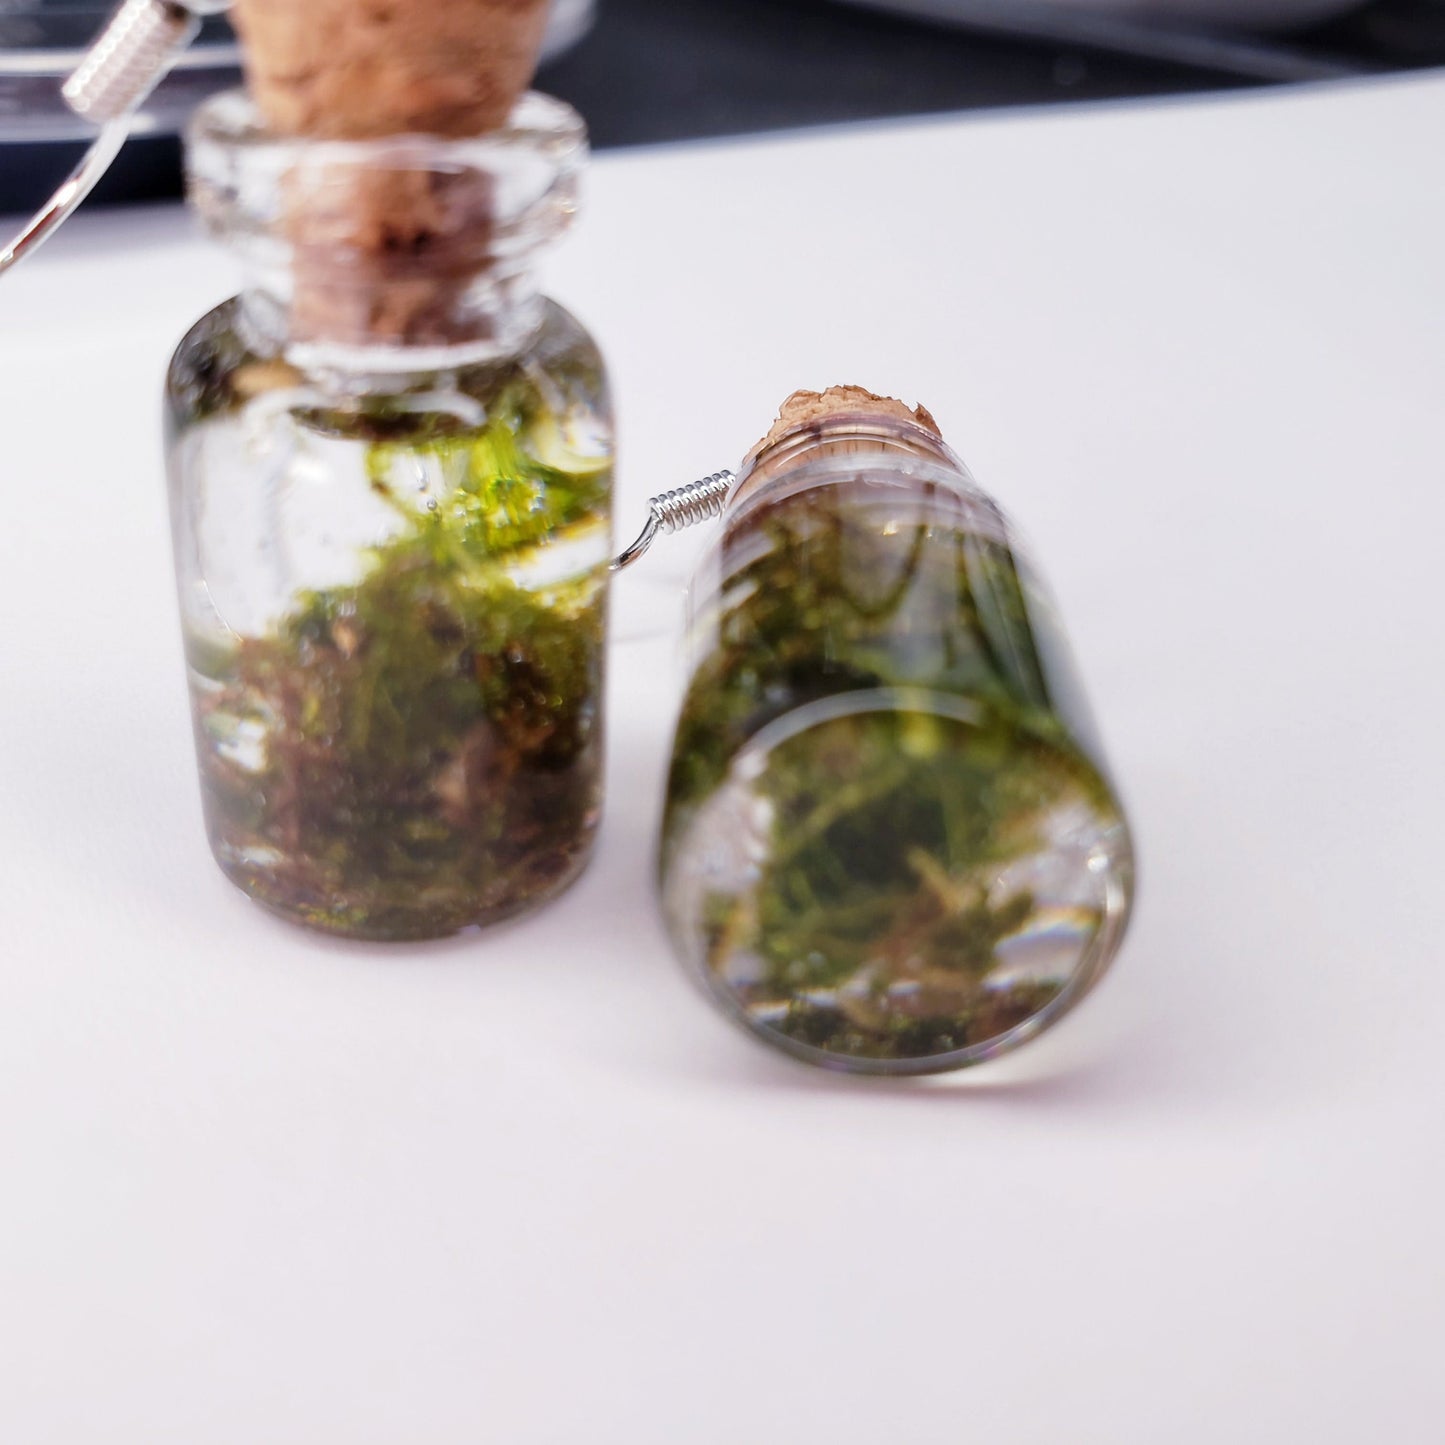 Moss in a Jar Earrings Resin Preserved Dangle hook cottage core nature natural green cork clear with fasteners Jewelry